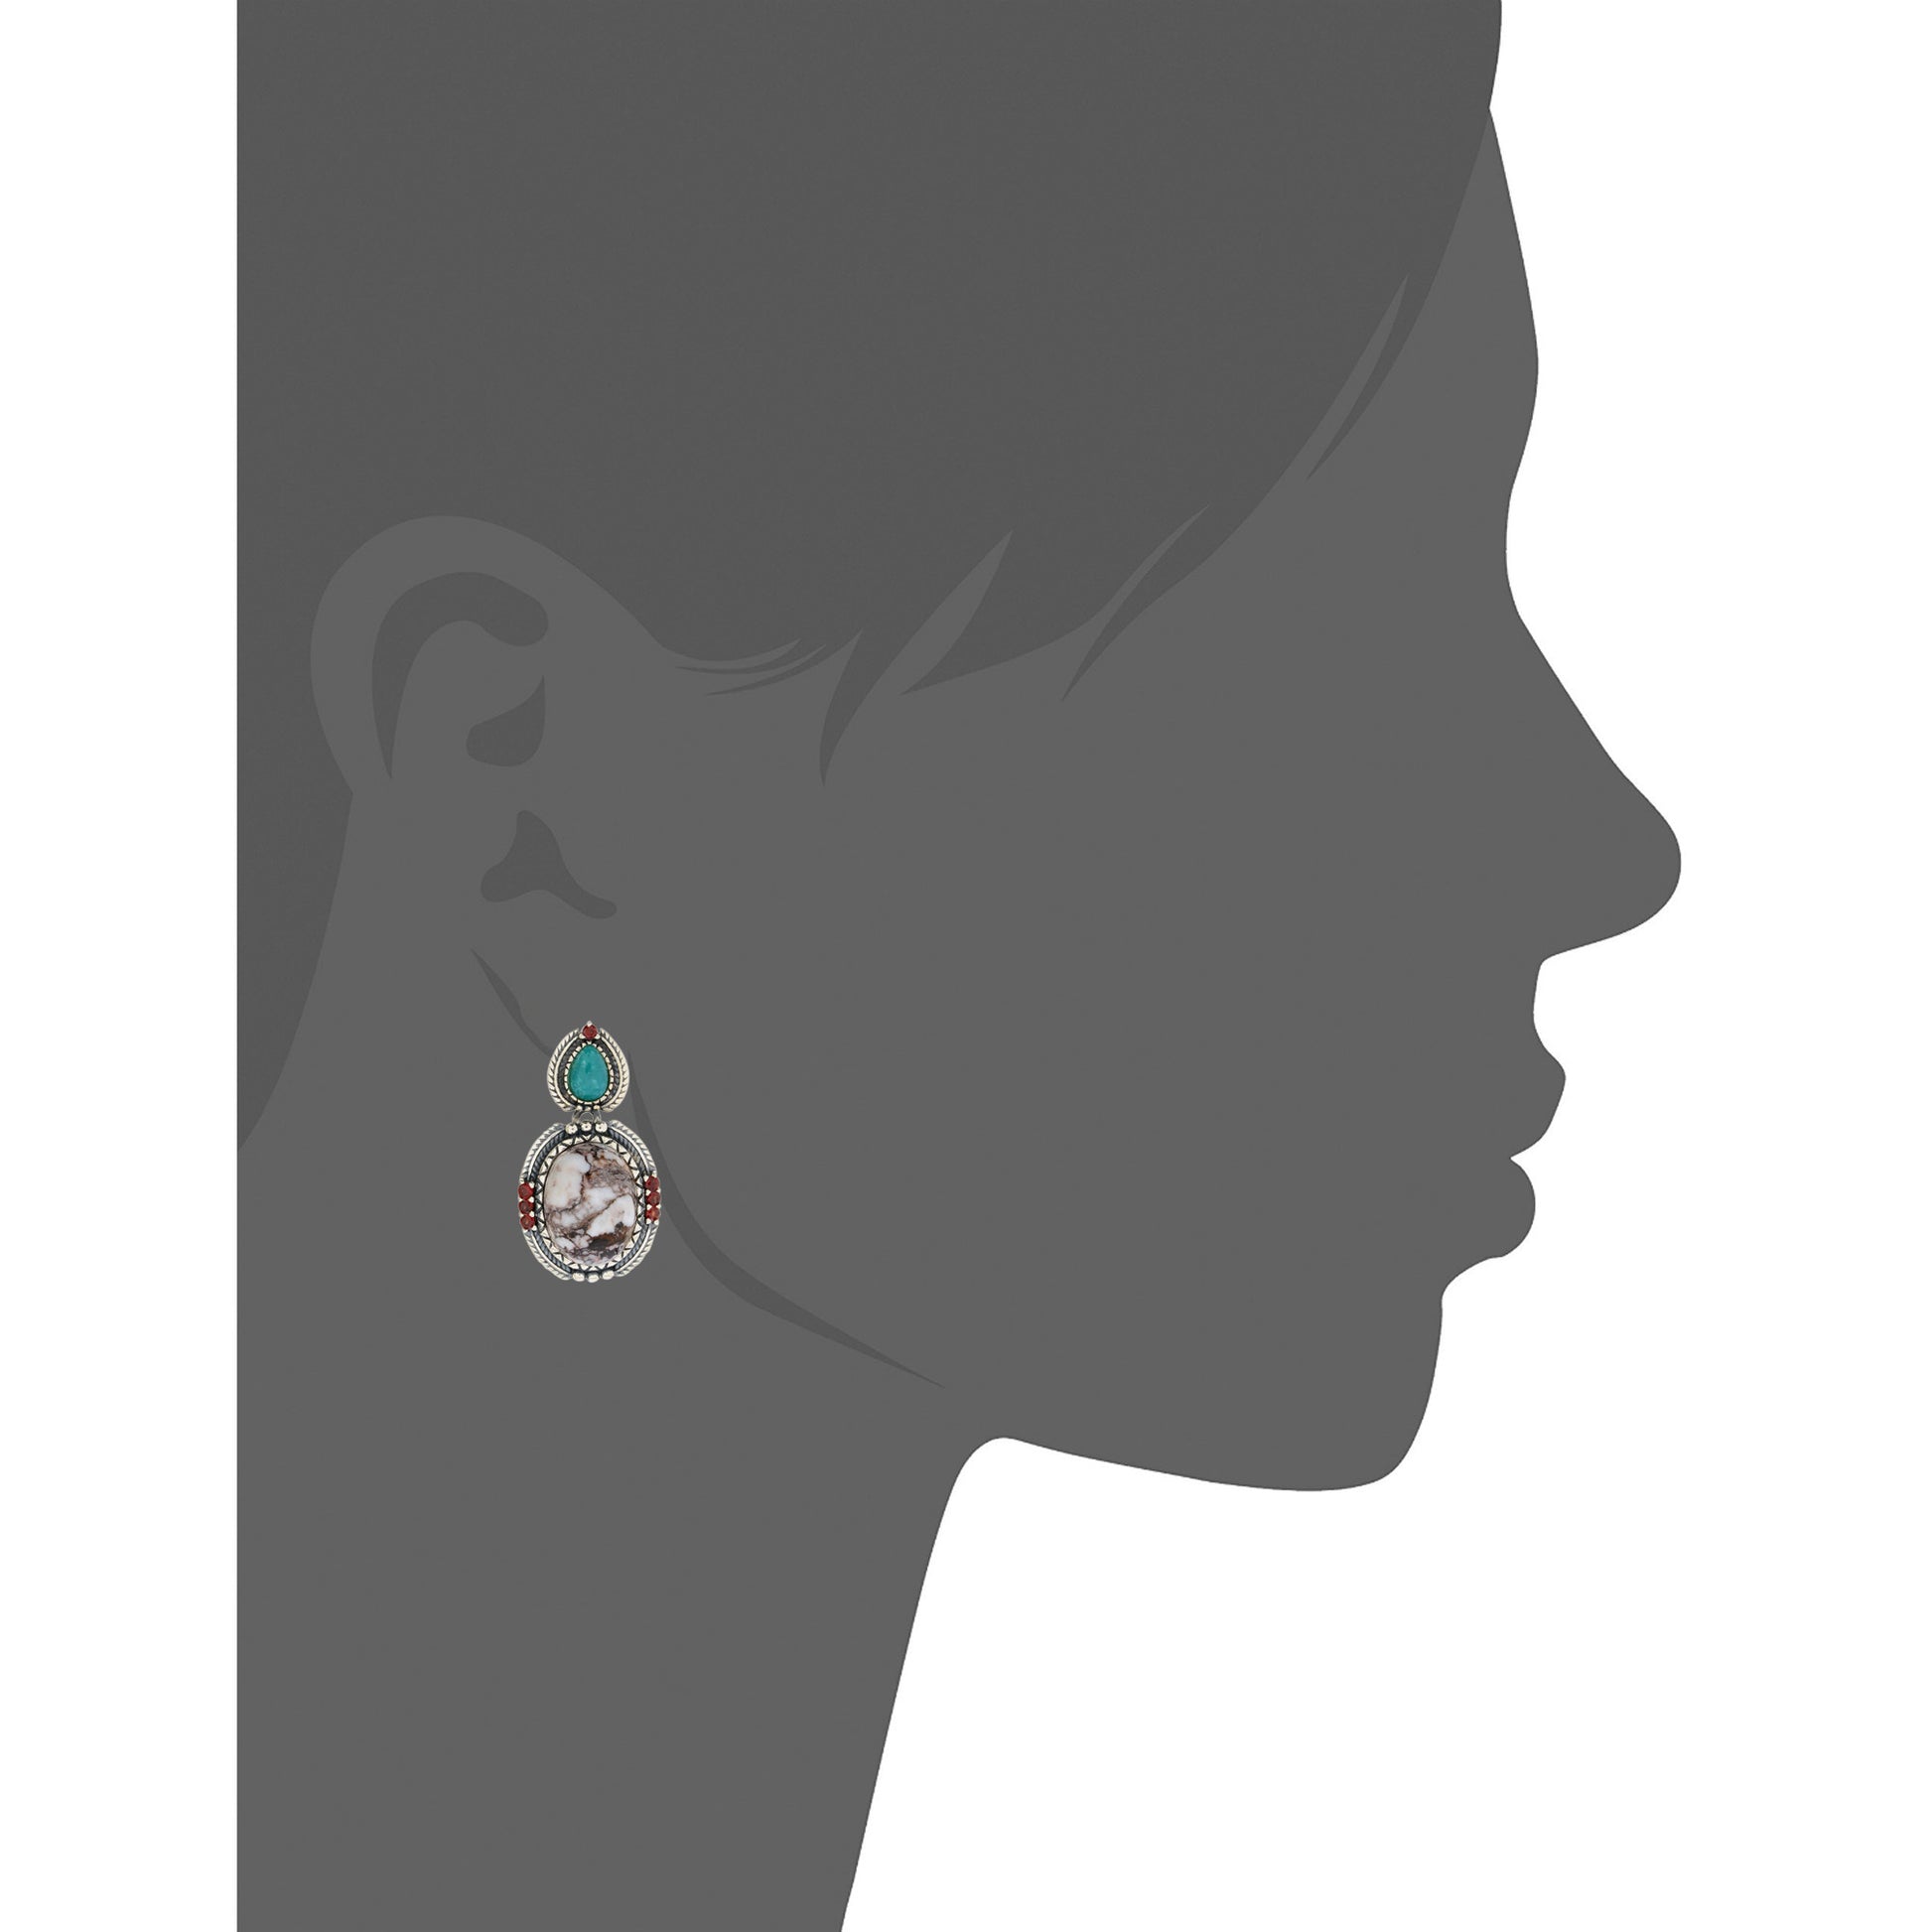 925 Sterling Silver Campofrio Turquoise, Red Garnet, Wild Horse Earring - Pinctore